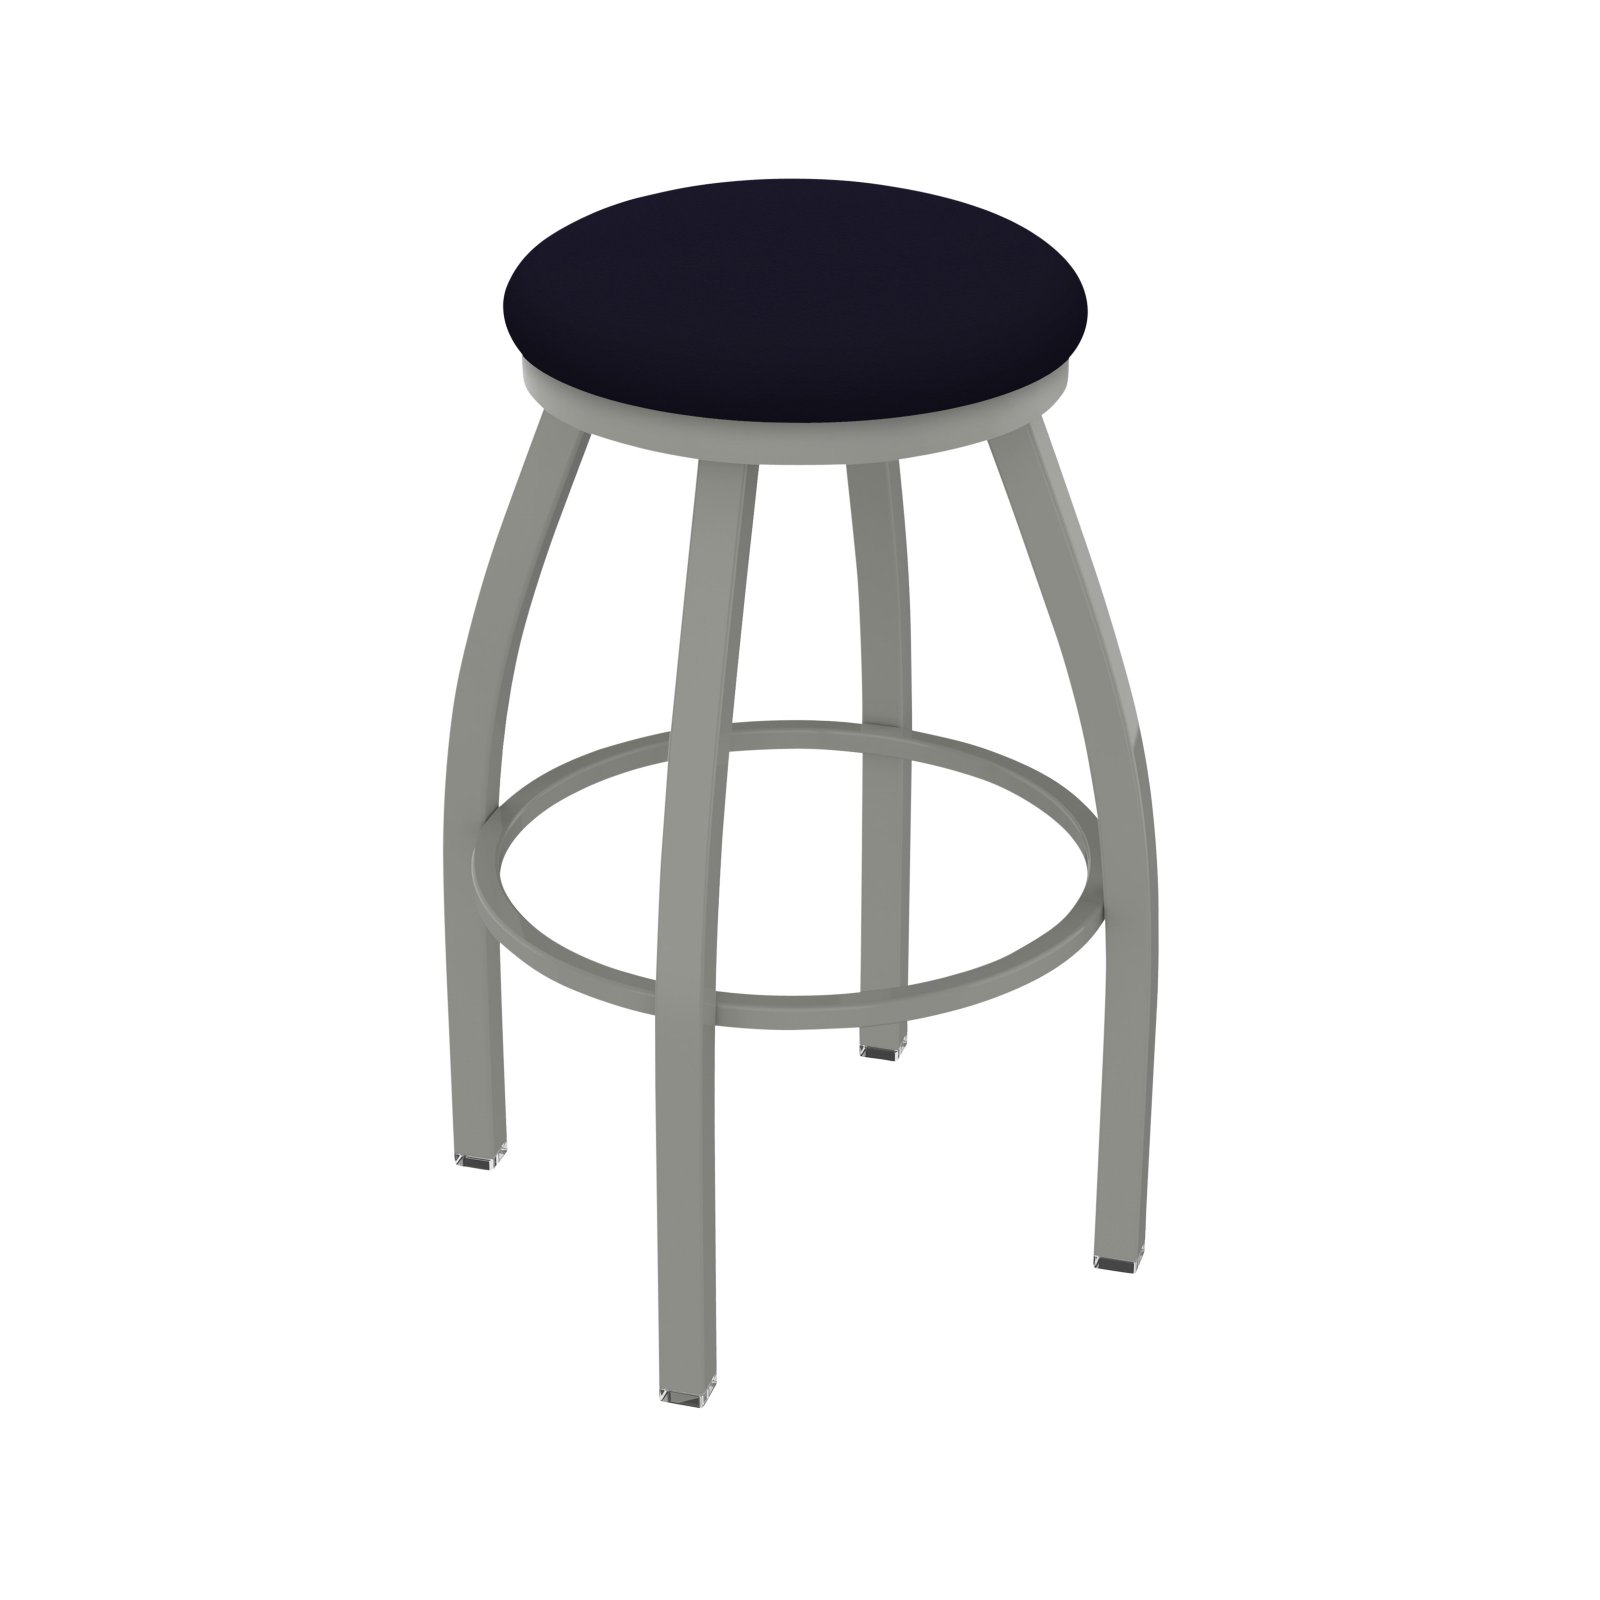 XL 802 Misha 25" Swivel Counter Stool with Bronze Finish and Rein Thatch Seat - image 2 of 2